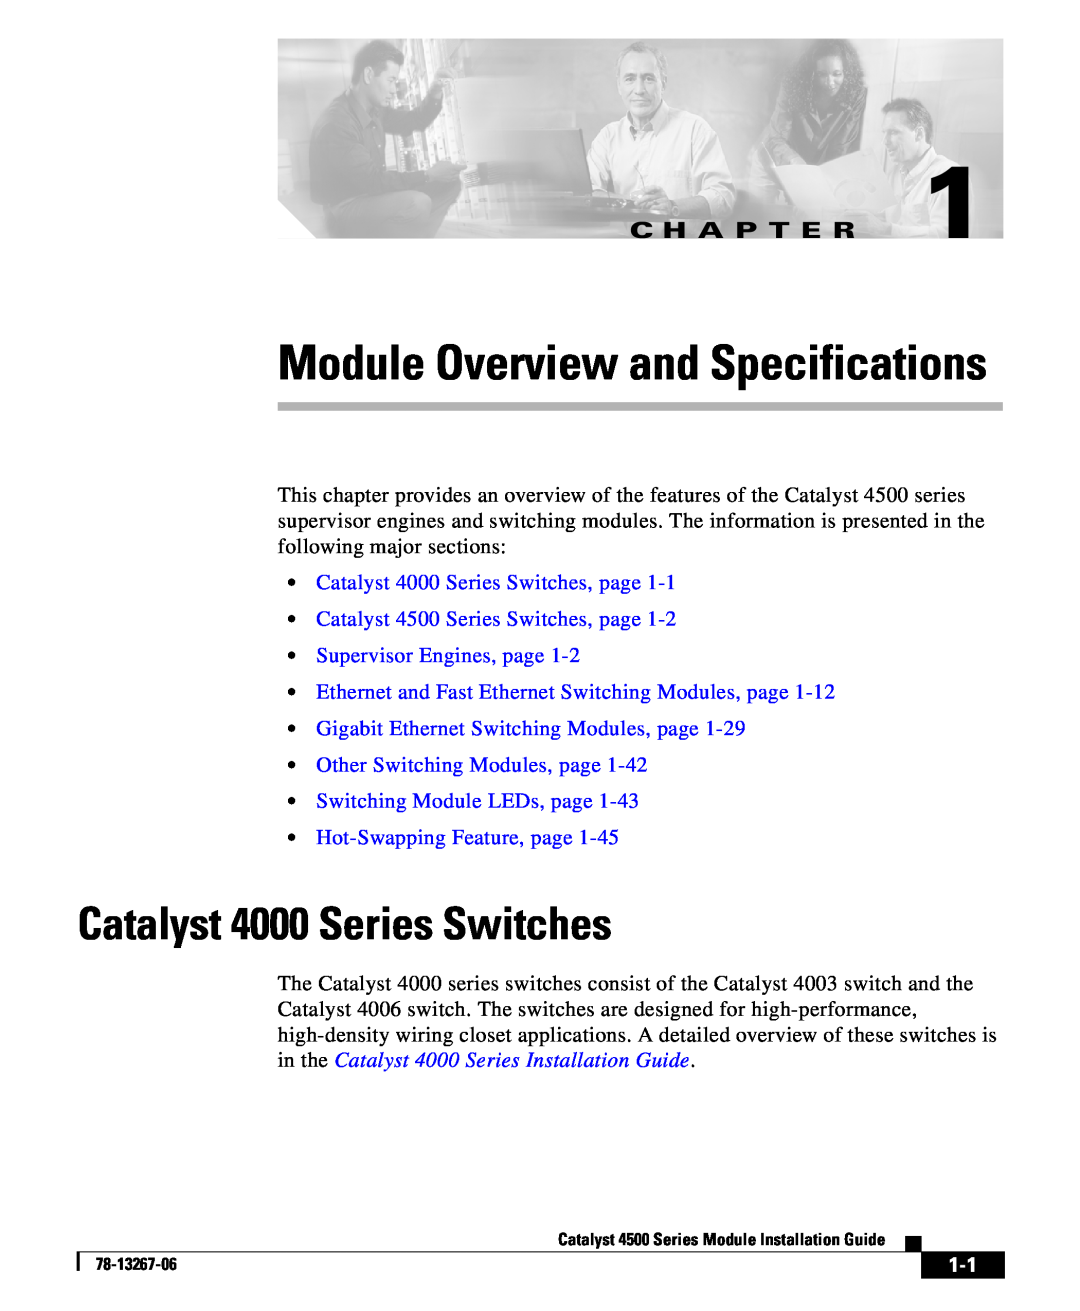 Cisco Systems specifications Module Overview and Specifications, Catalyst 4000 Series Switches, C H A P T E R 